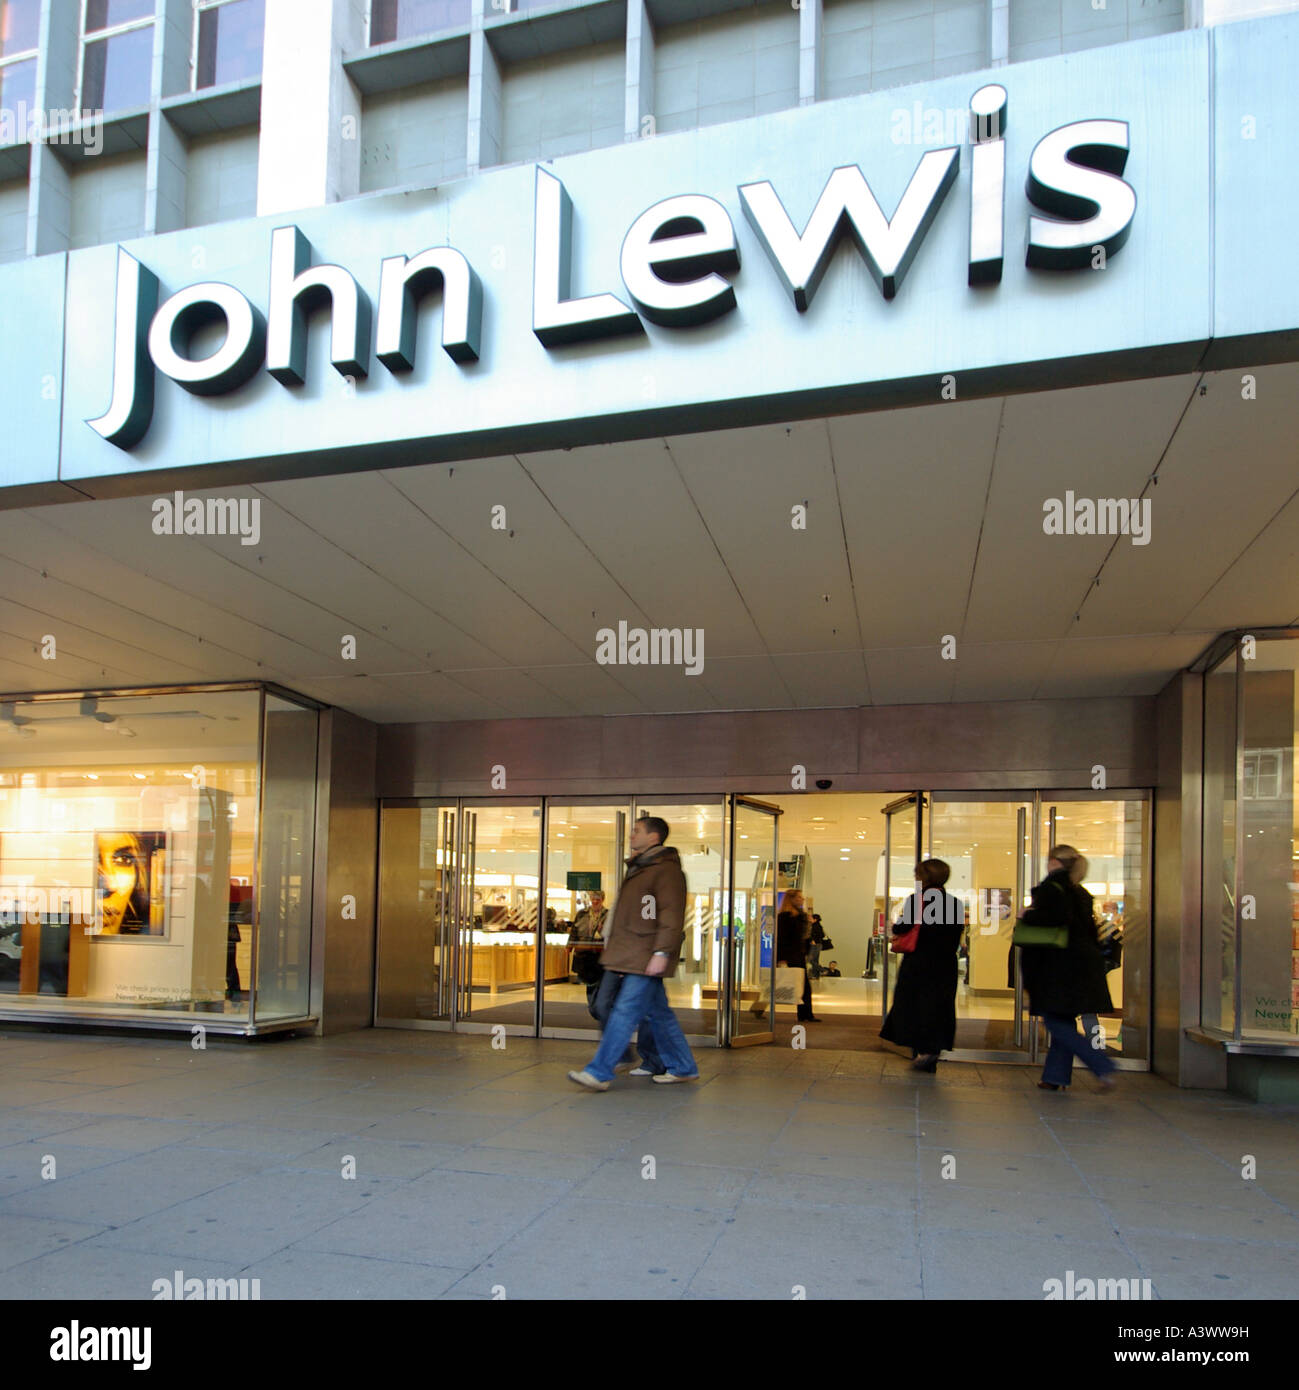 Shopping street scene shoppers at John Lewis retail business department store main entrance doors sign above Oxford Street West End London England UK Stock Photo